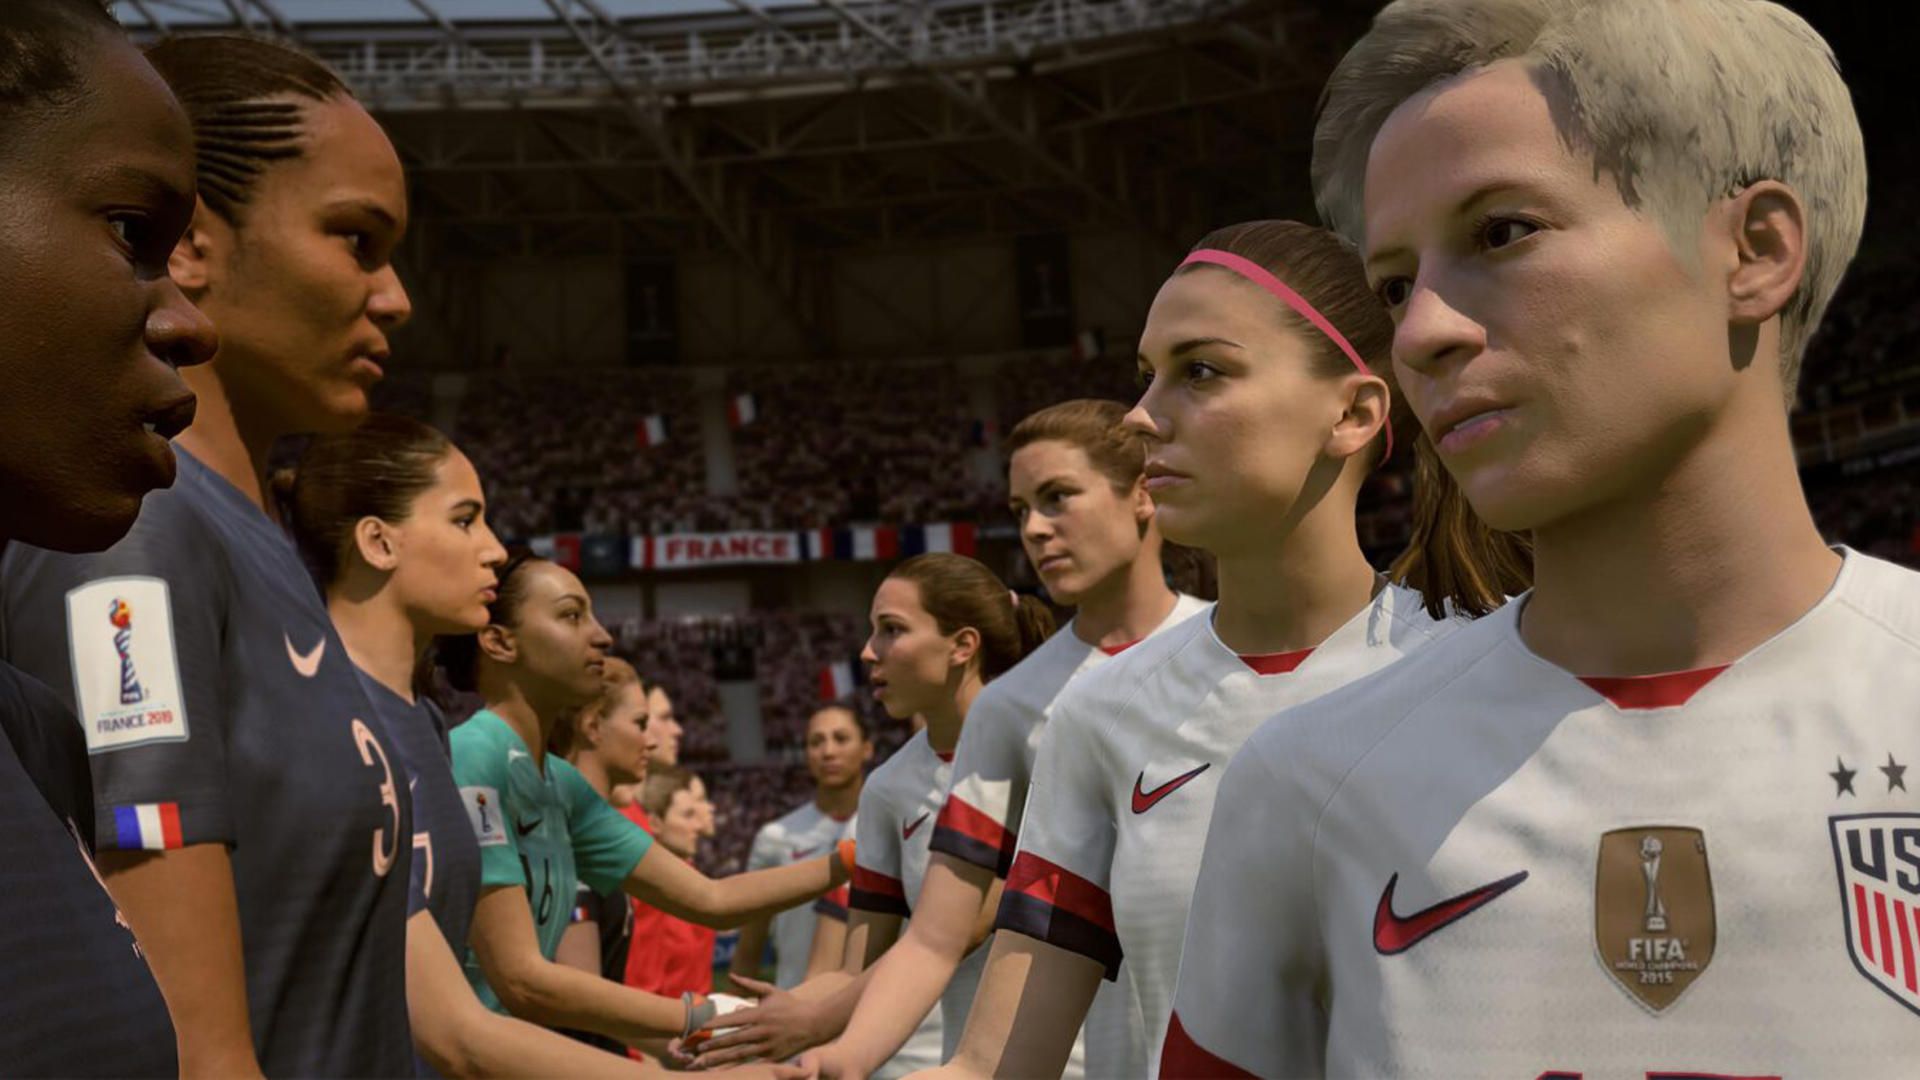 FIFA 21 on PS5 and Xbox Series X Will Continue Including Women's Teams